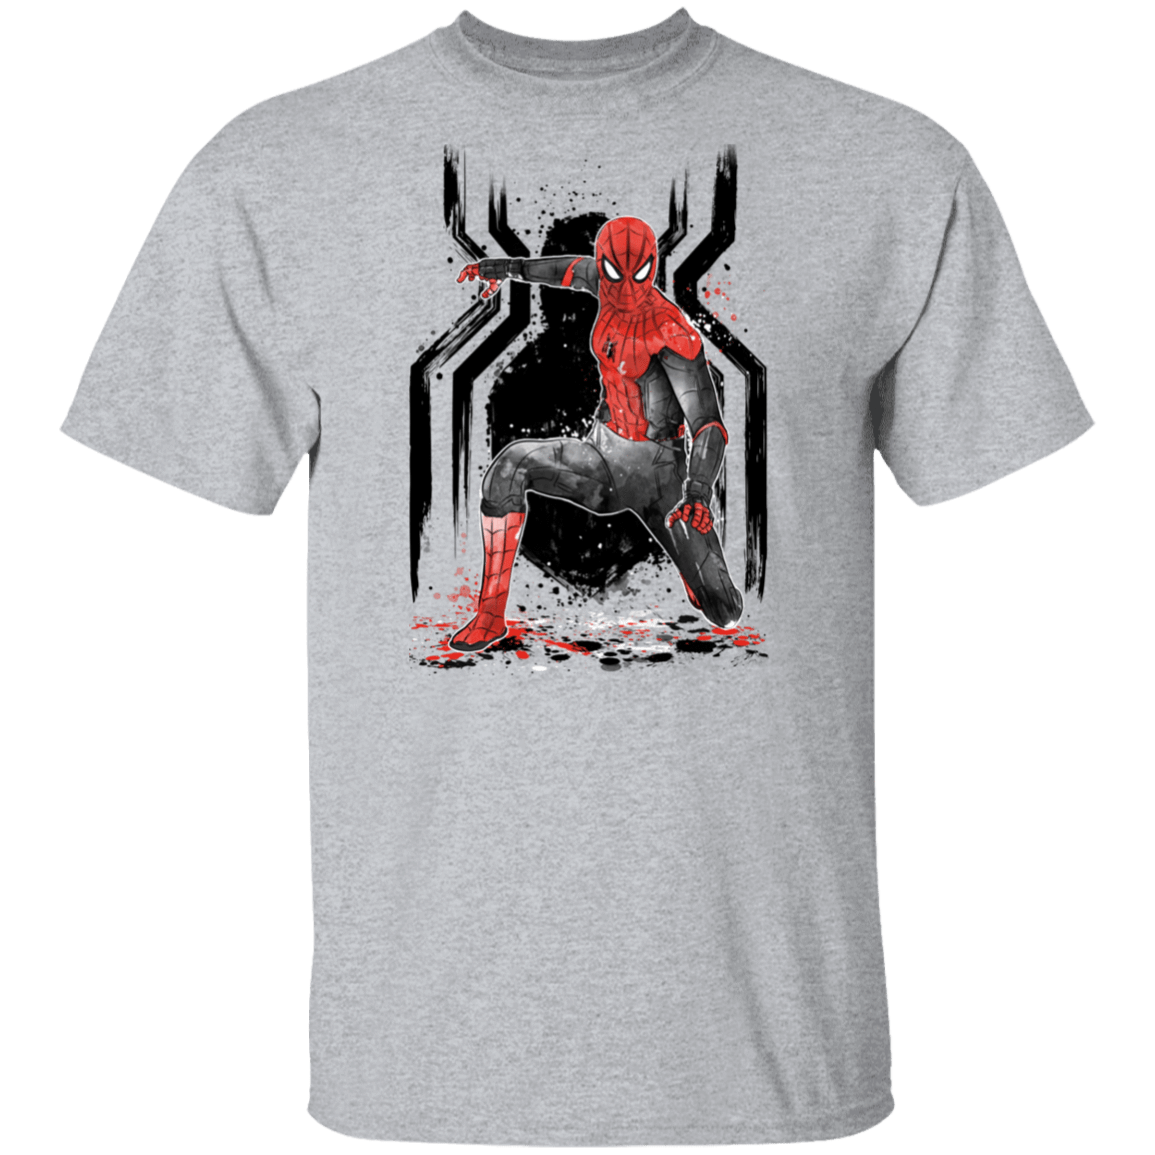 T-Shirts Sport Grey / S RED-AND-BLACK Spider suit T-Shirt